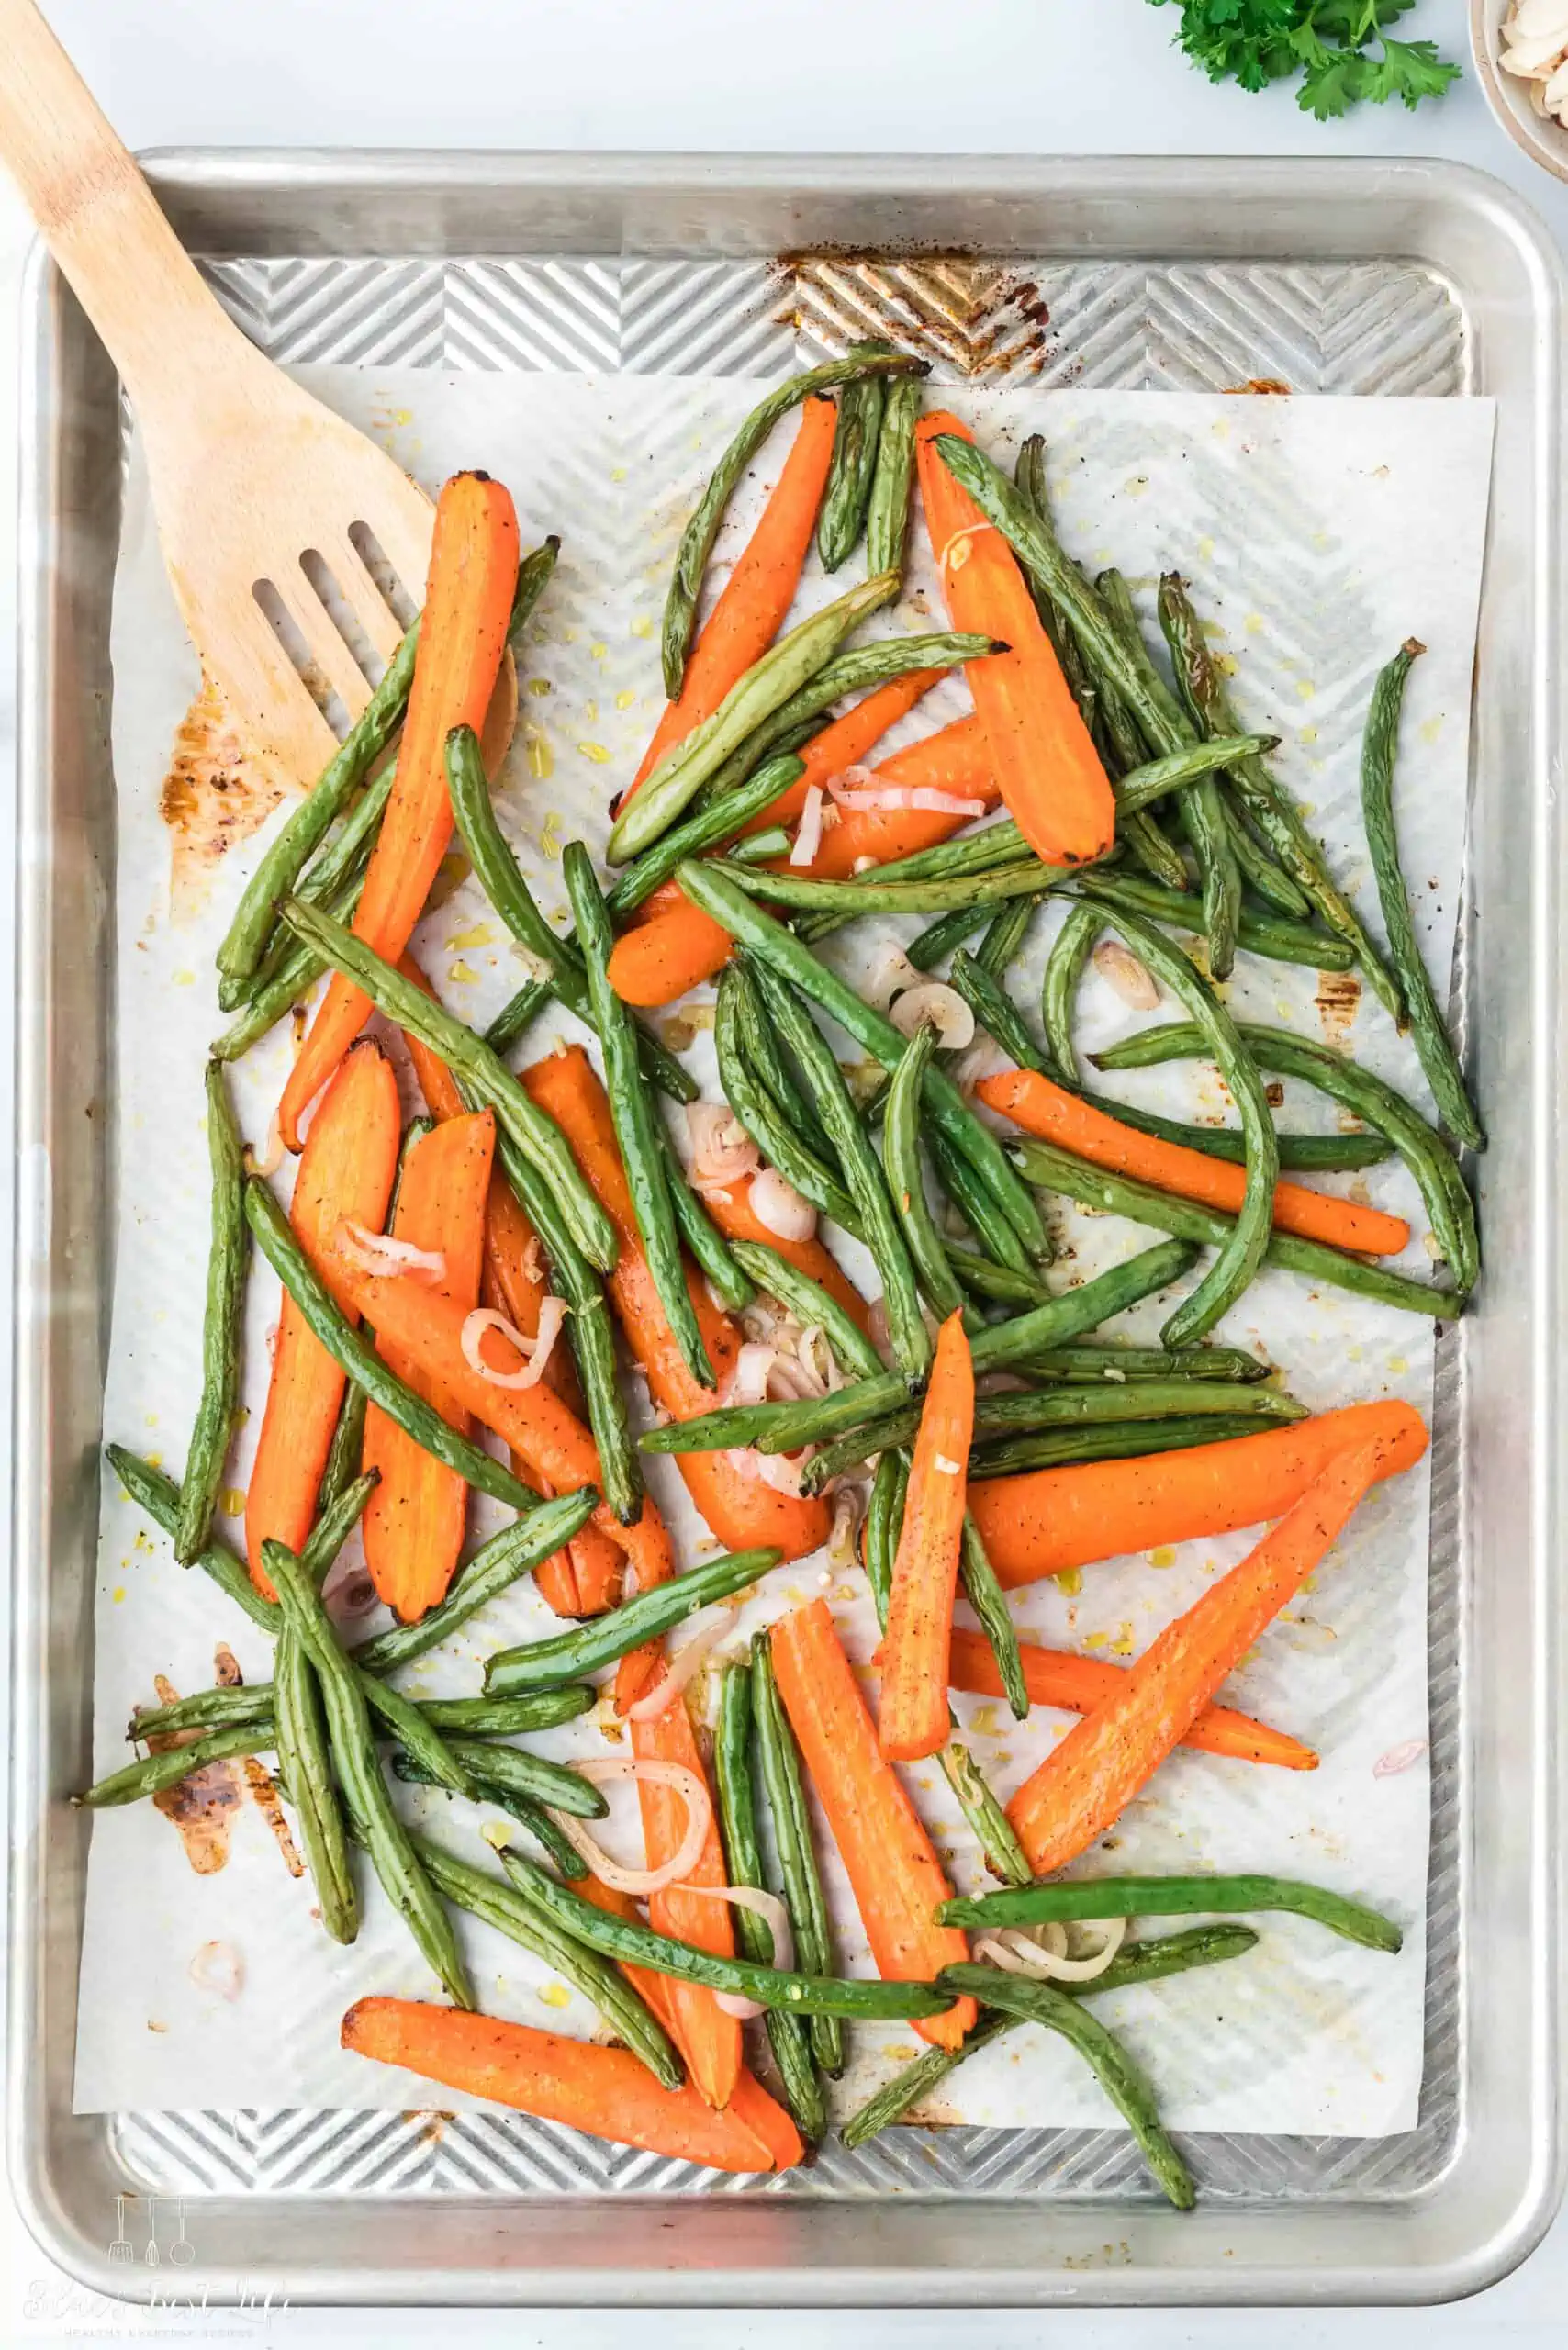 Roasted carrots and green beans on a baking tray.